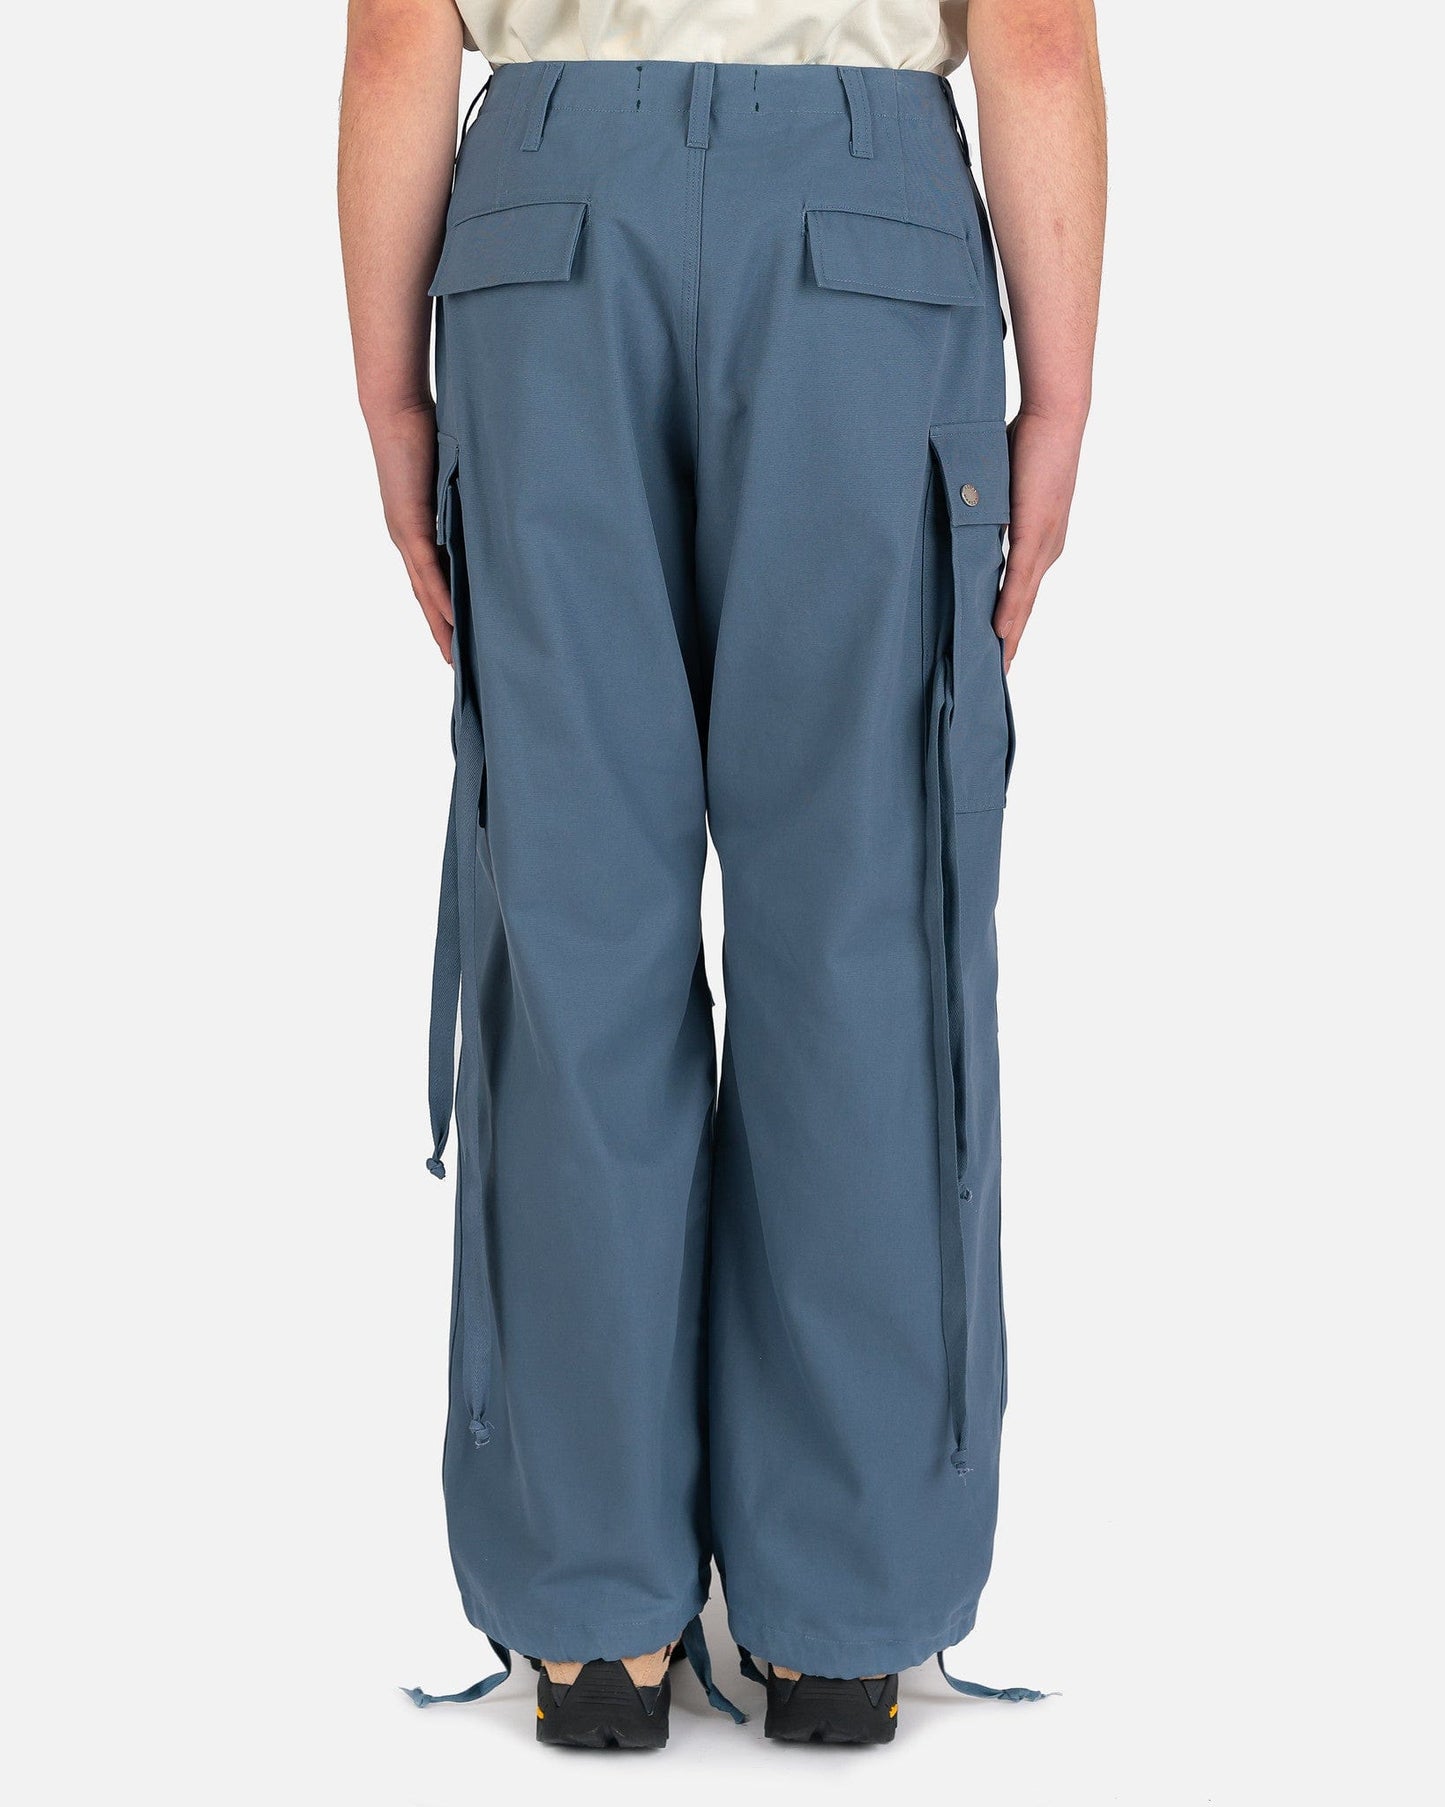 Reese Cooper Men's Pants Brushed Cotton Canvas Cargo Pants in Slate